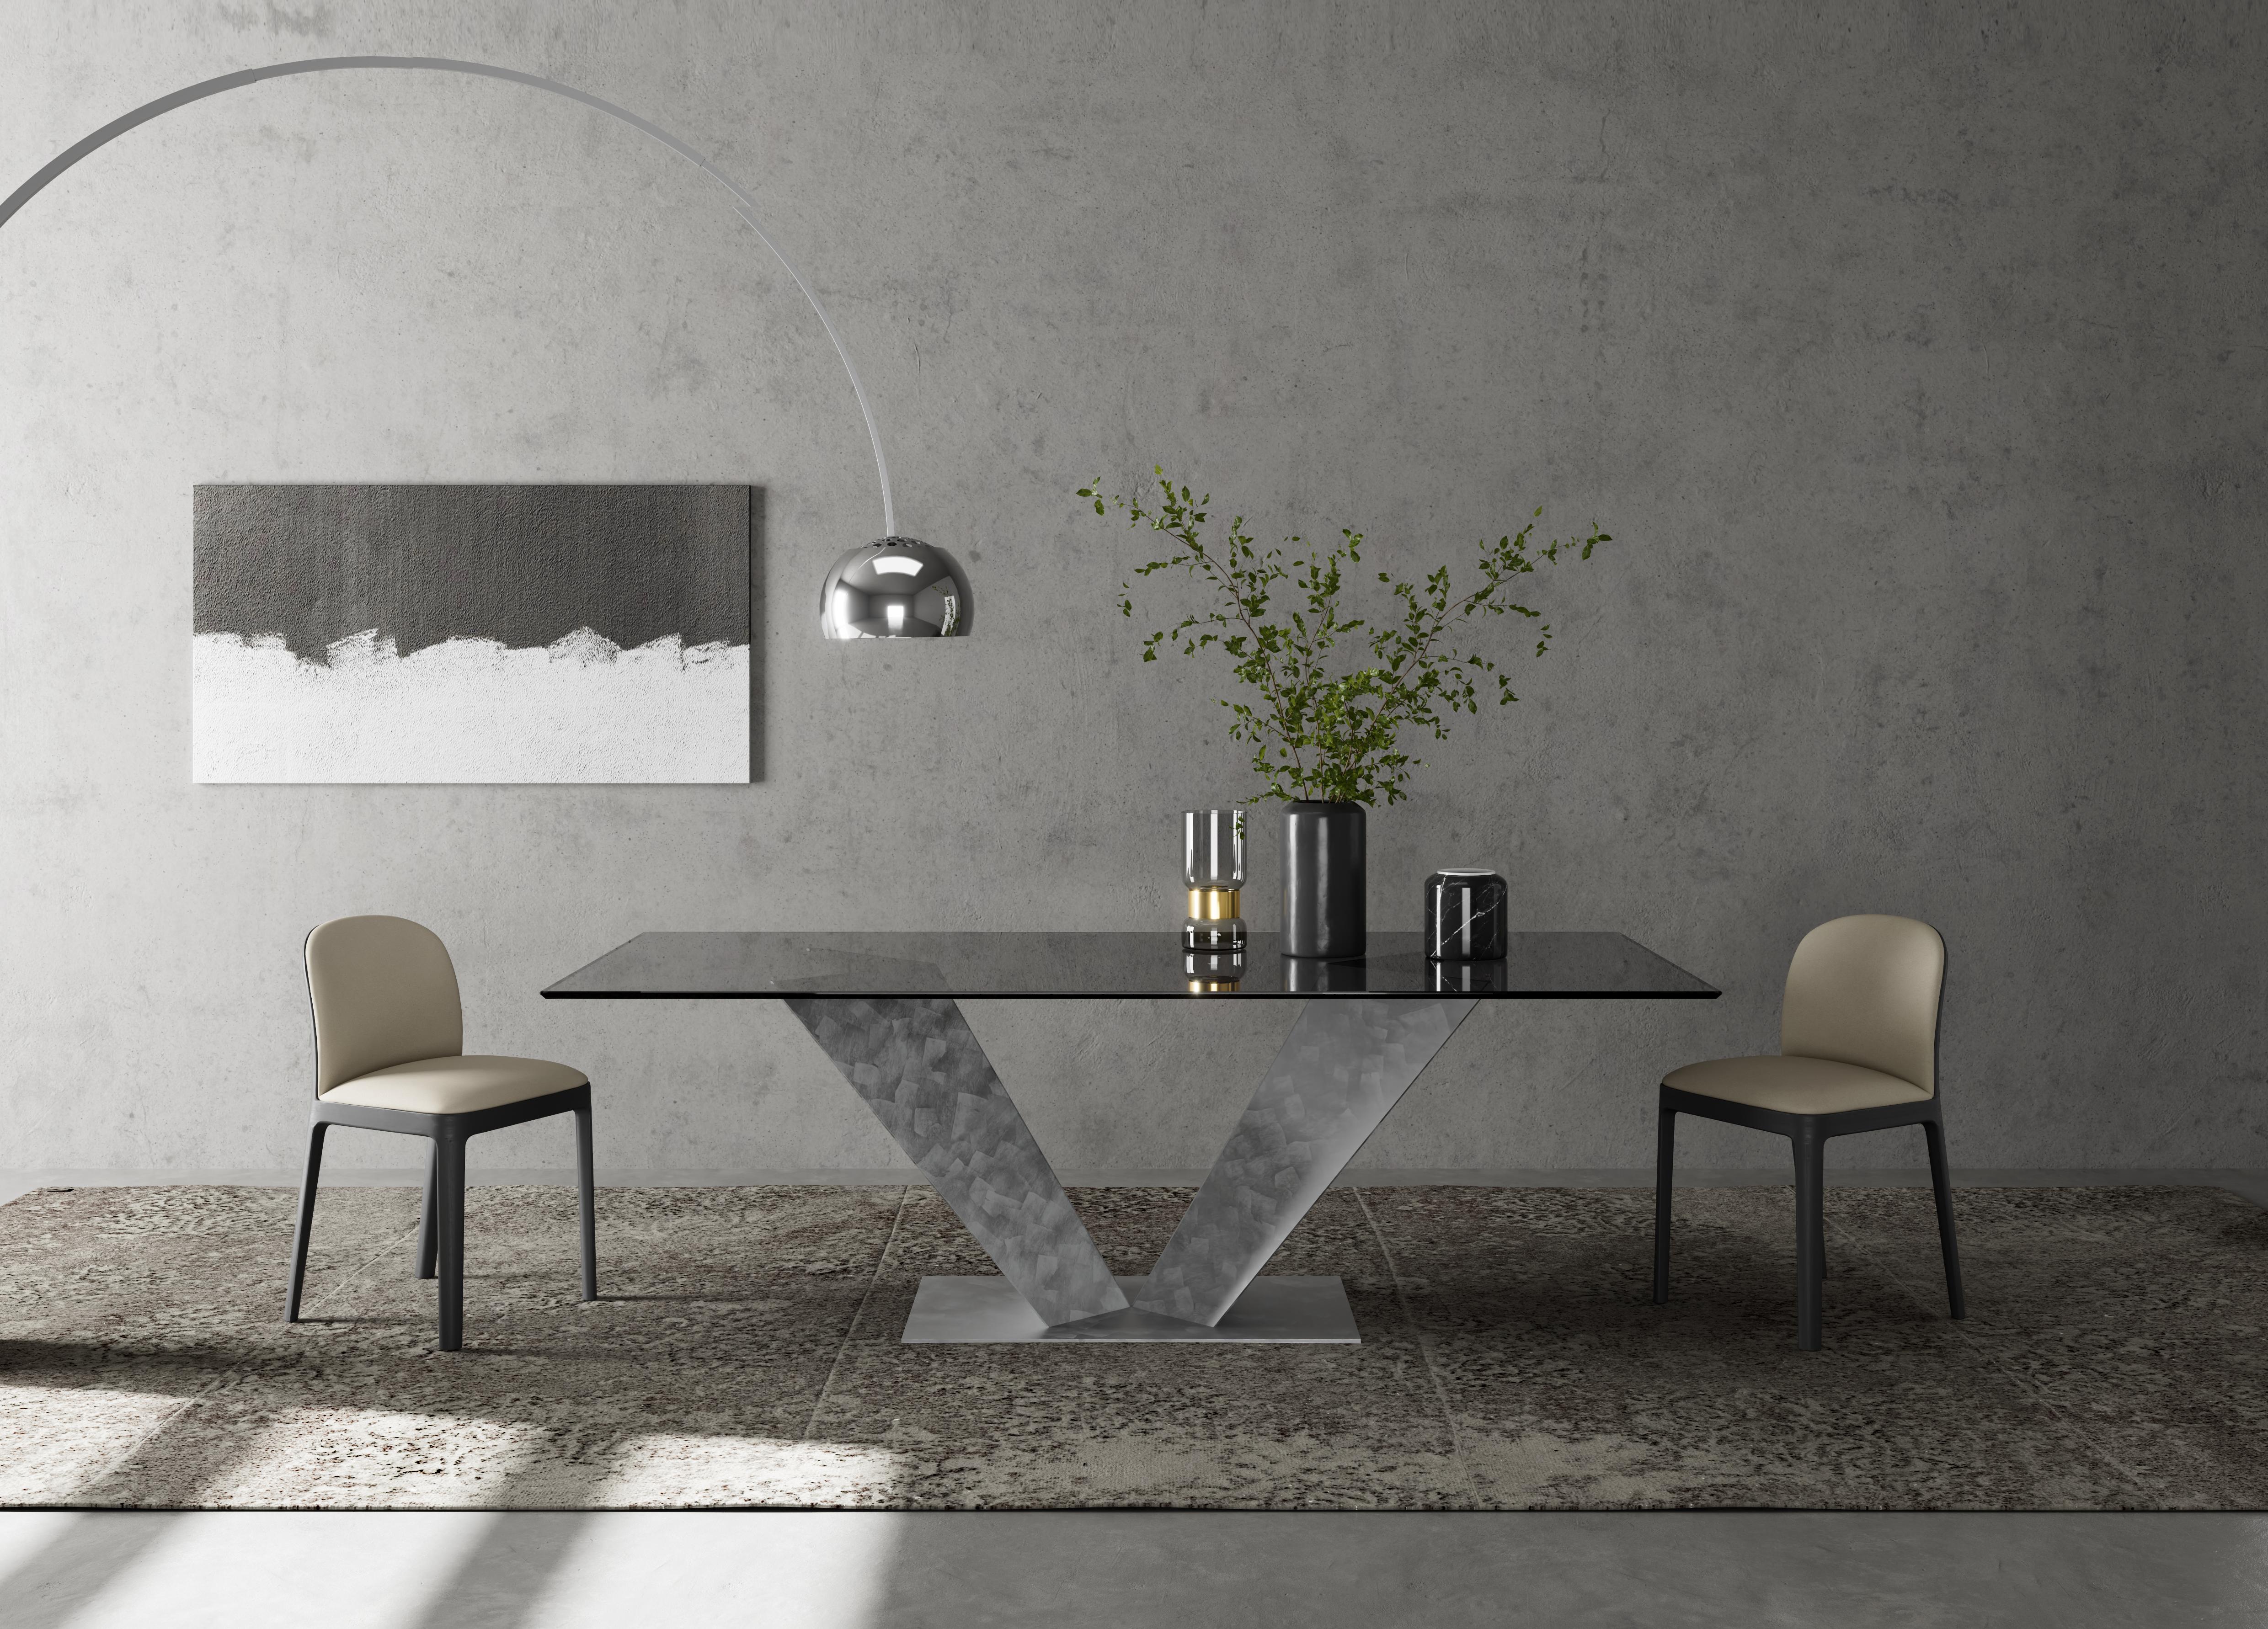 Ares Dining Table by Chinellato Design
Dimensions: W 250 x D 120 x H 72 cm
Materials:
Top: Smooth Smoked Tempered Glass
Base: Silver Large Pieces finish.


Ares, a rectangular dining table available in three sizes, offered with three combinations of